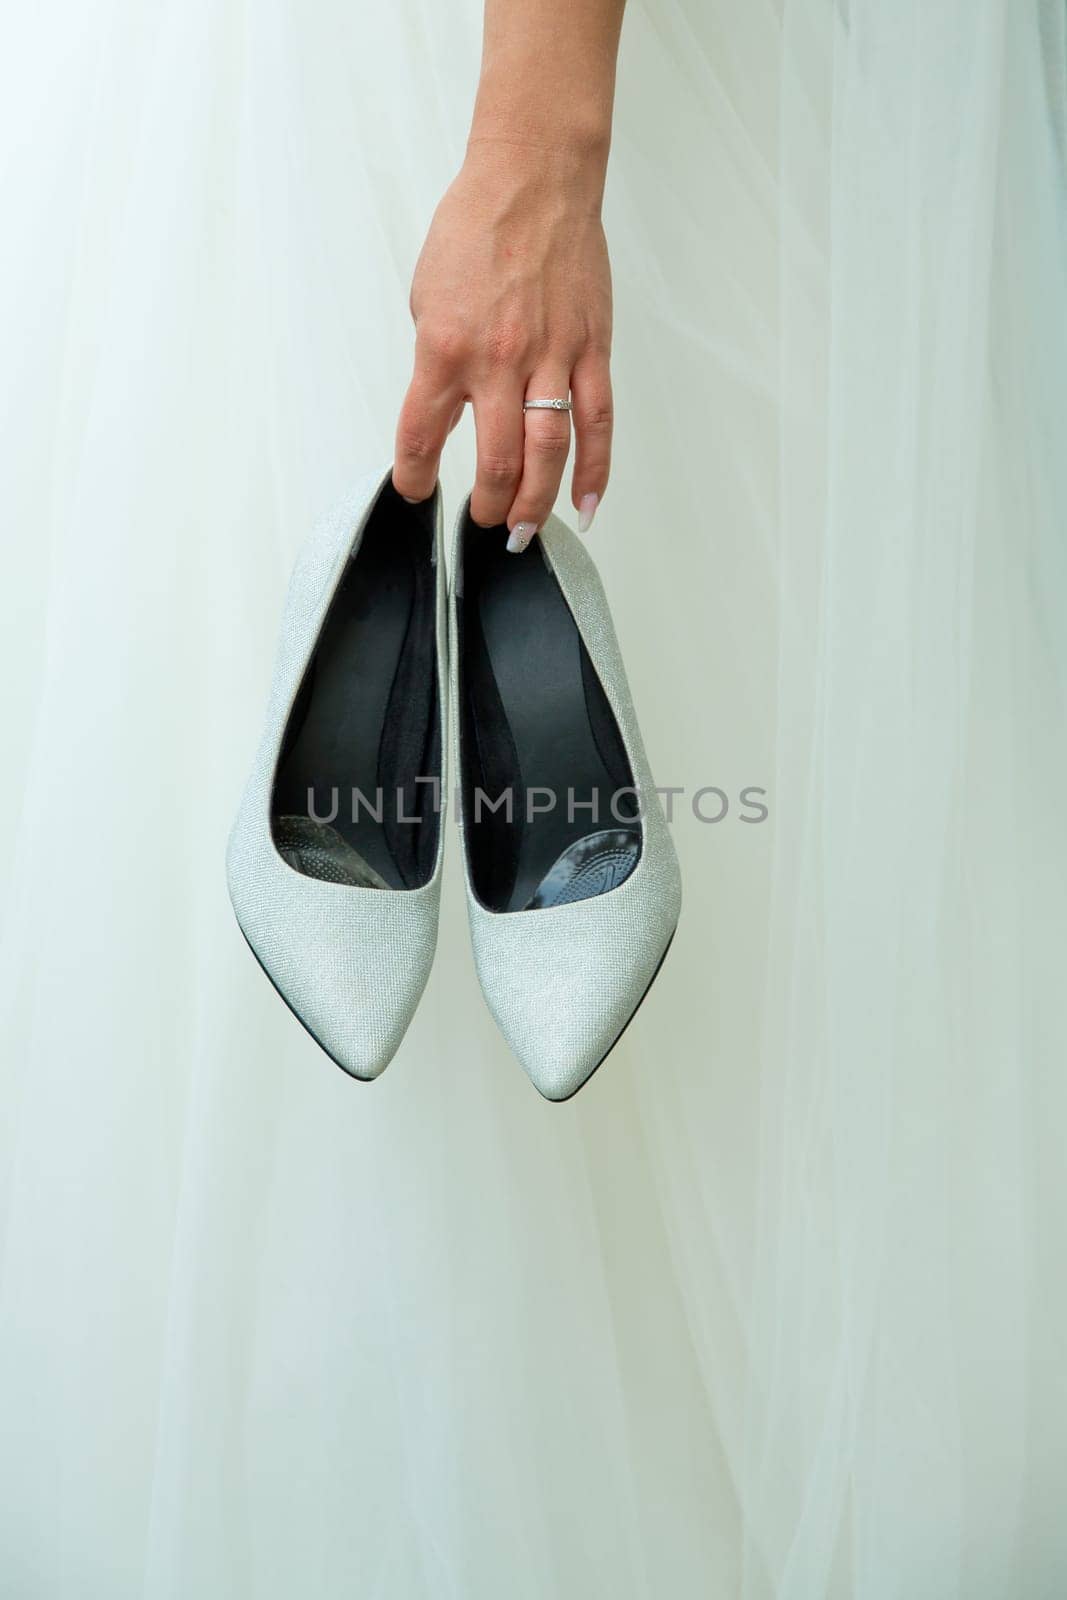 The bride holds wedding shoes in her hands.